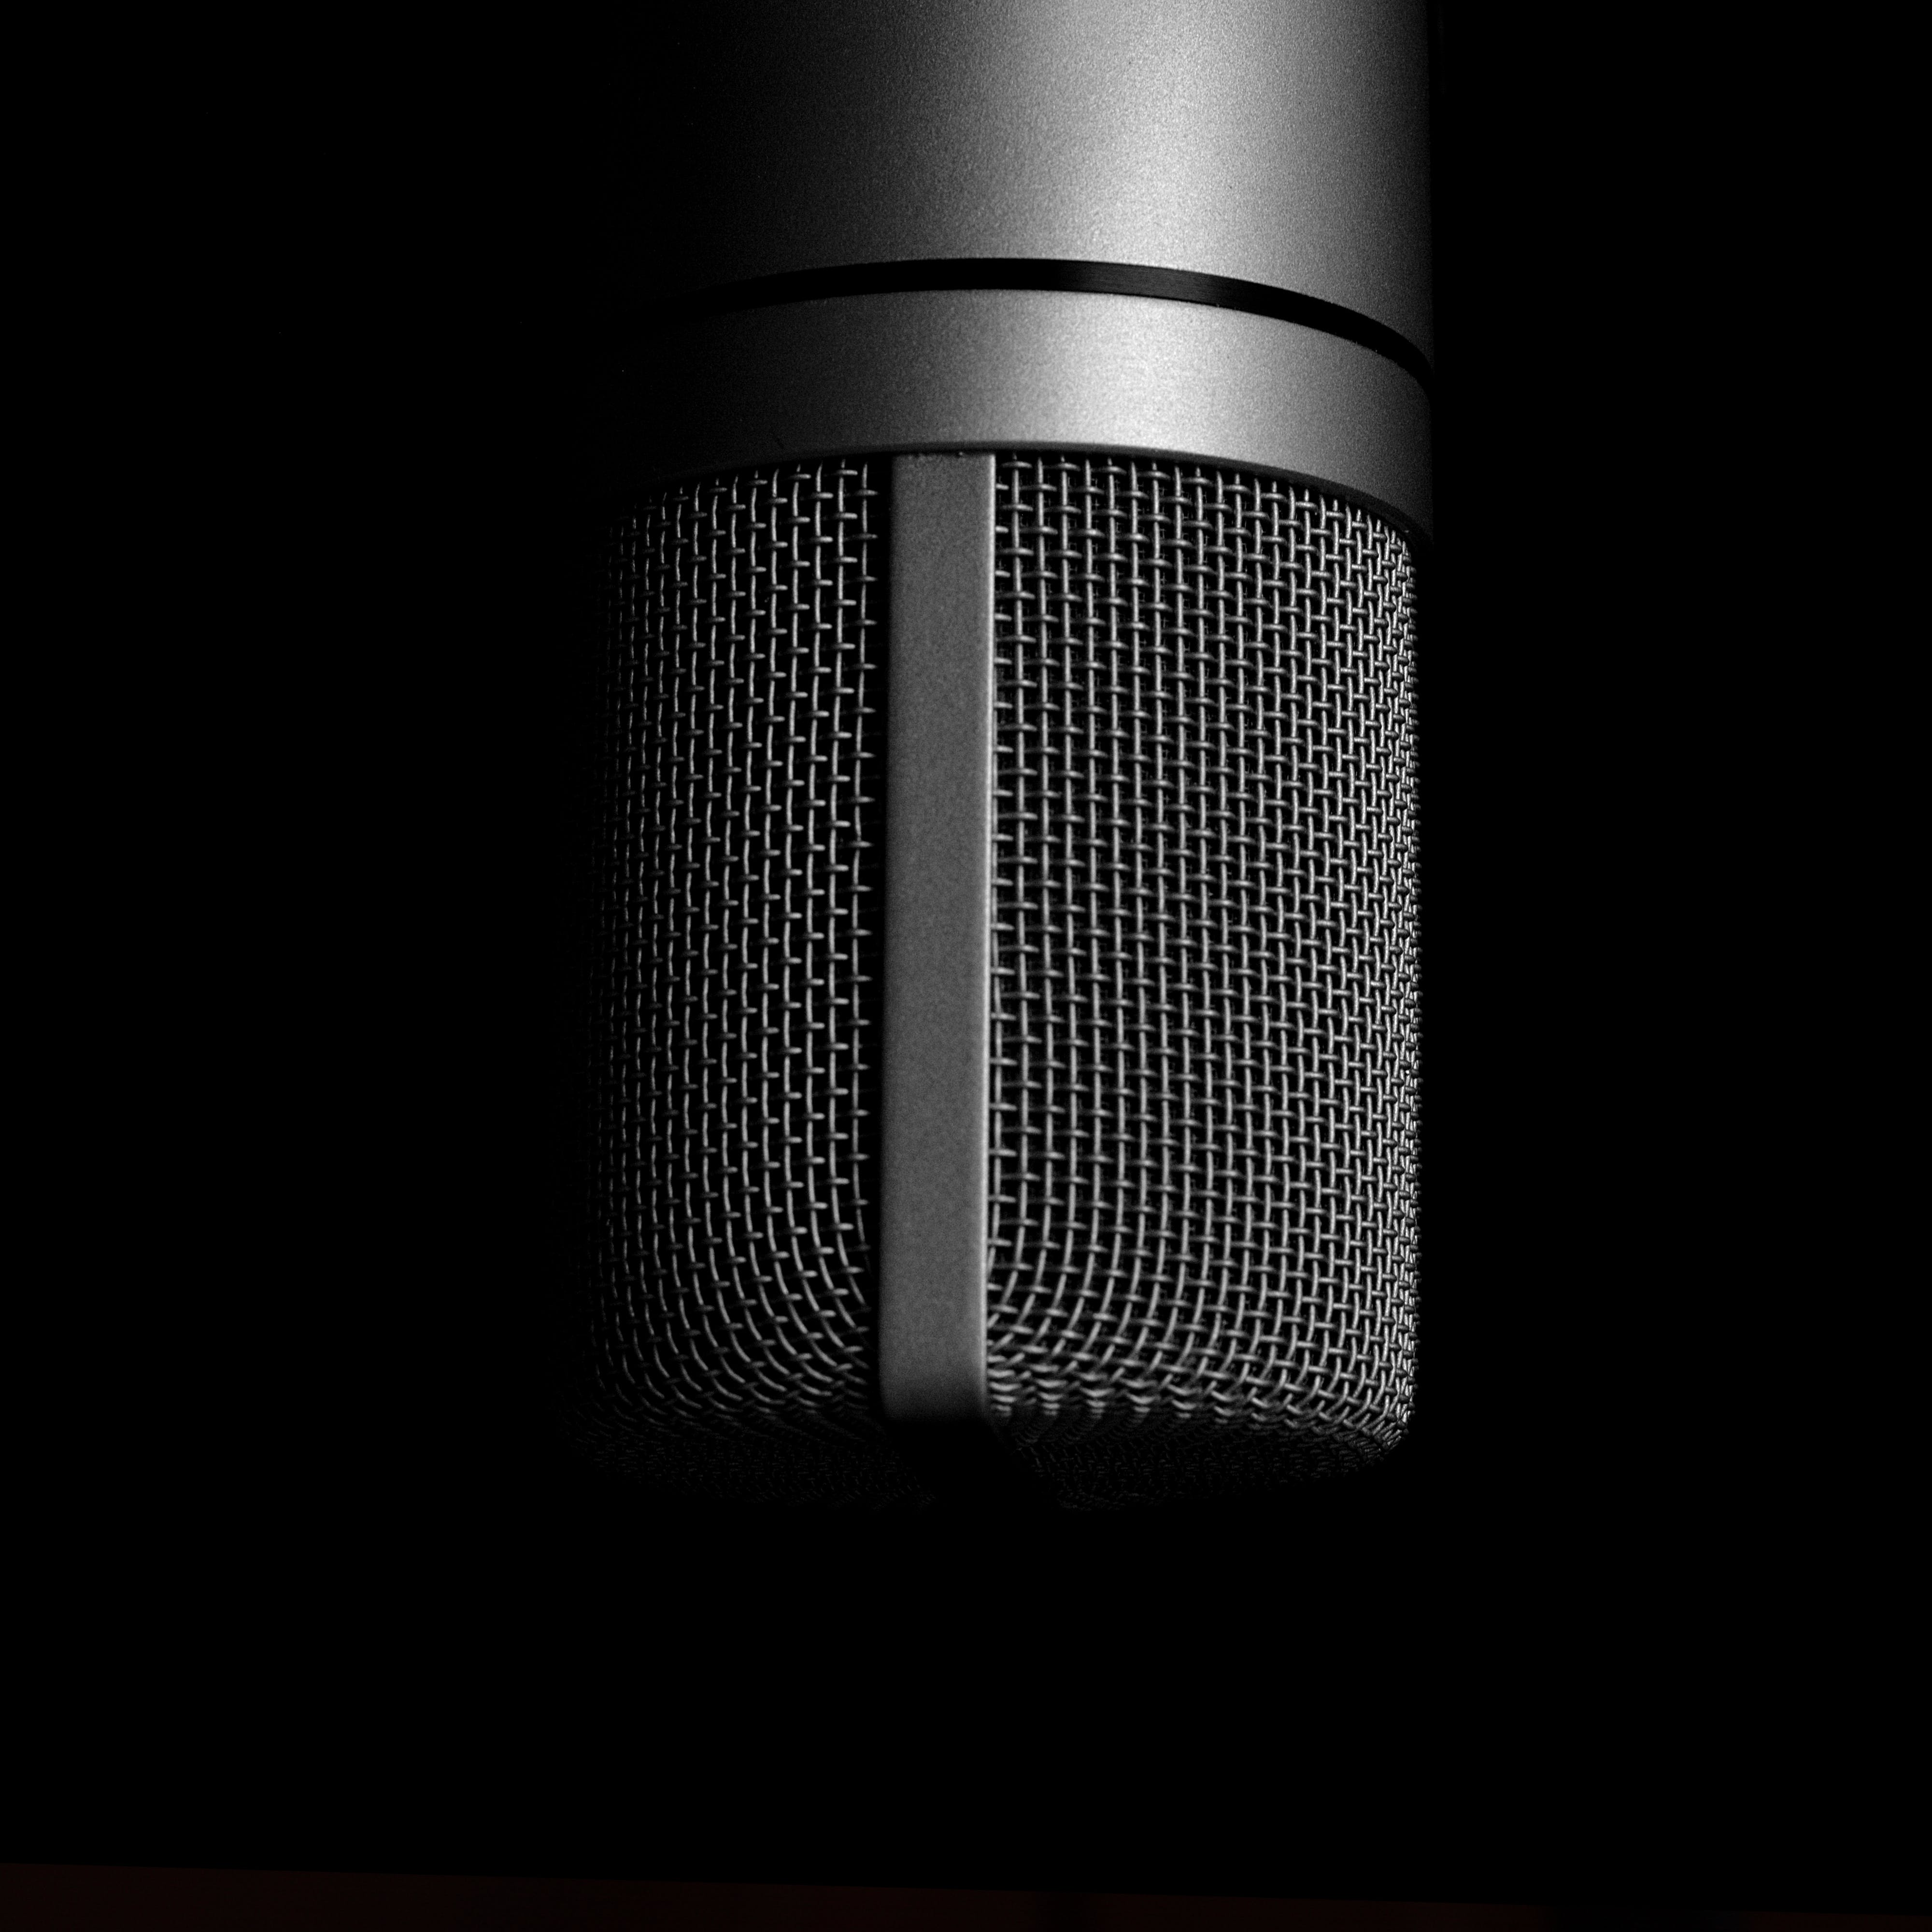 microphone against black background